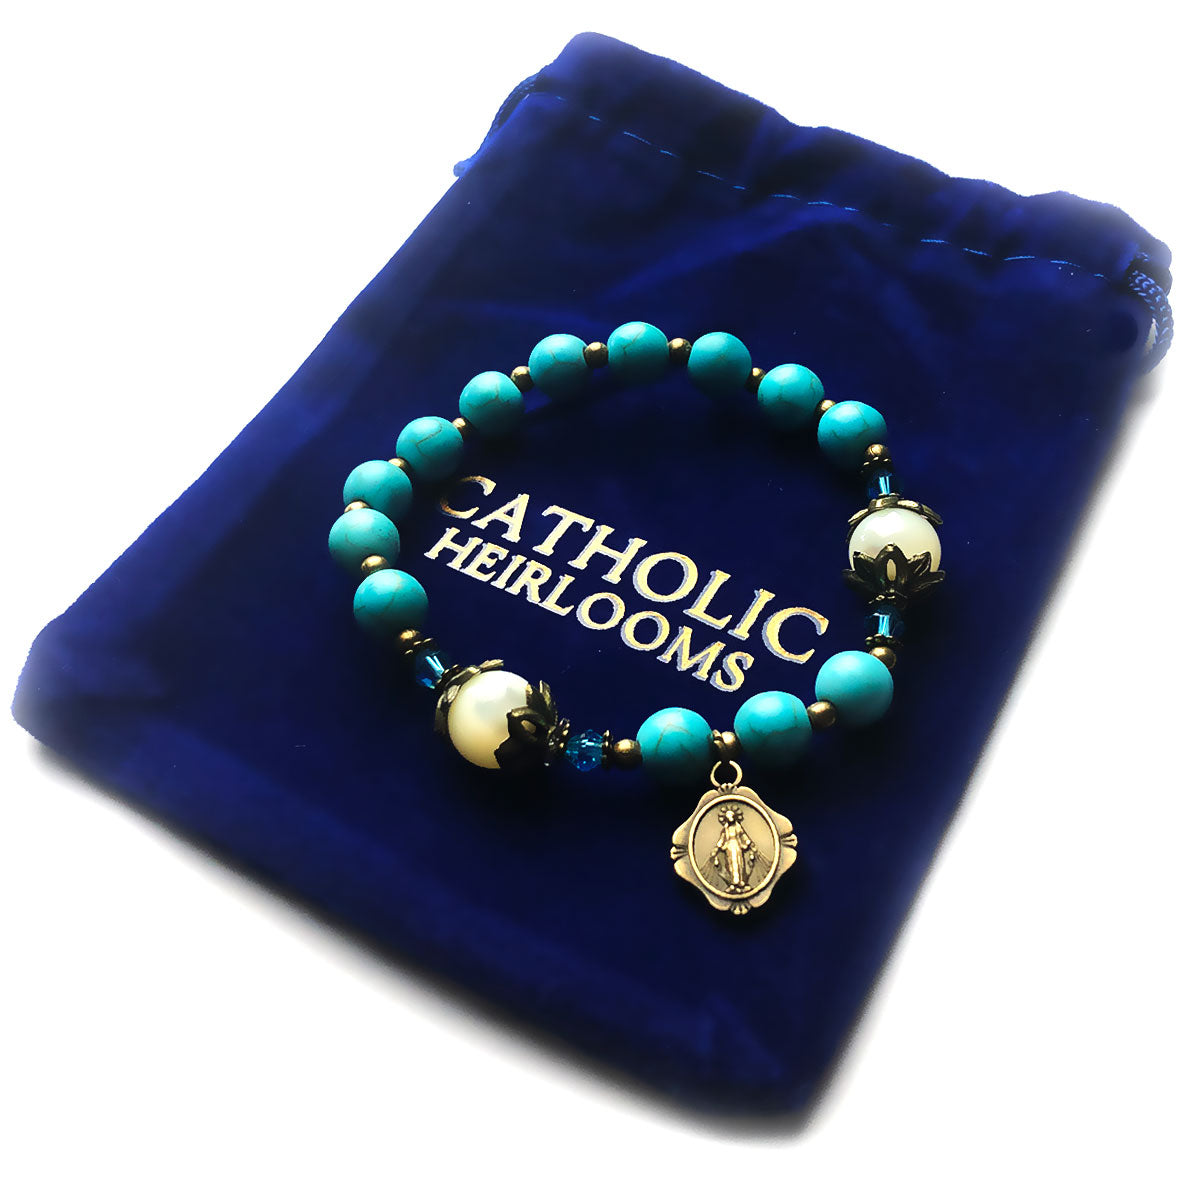 Turquoise and Mother of Pearl Stone Rosary Bracelet by Catholic Heirlooms - Confirmation - Holy Communion Gift